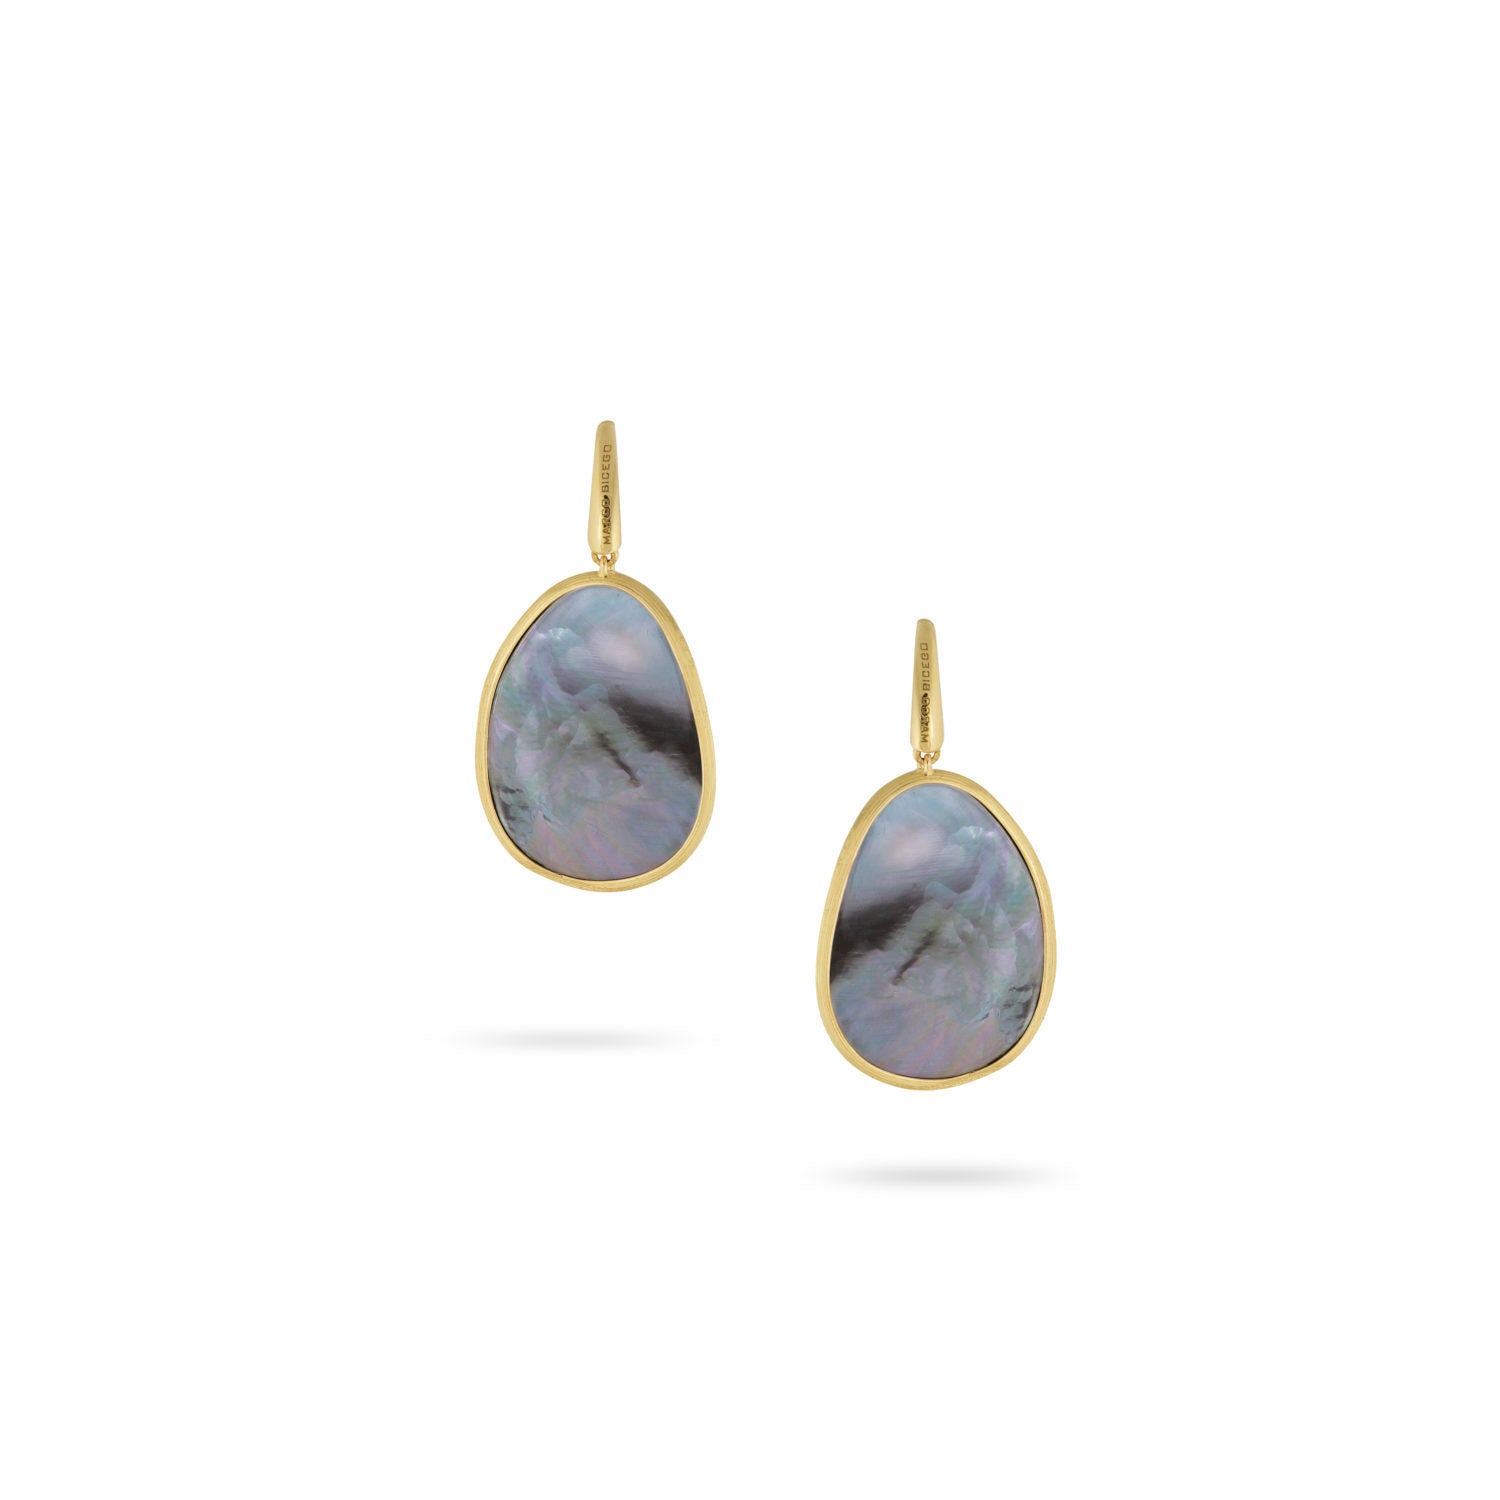 Lunaria Earrings in 18k Yellow Gold and Grey Mother of Pearl with French Hooks - Orsini Jewellers NZ